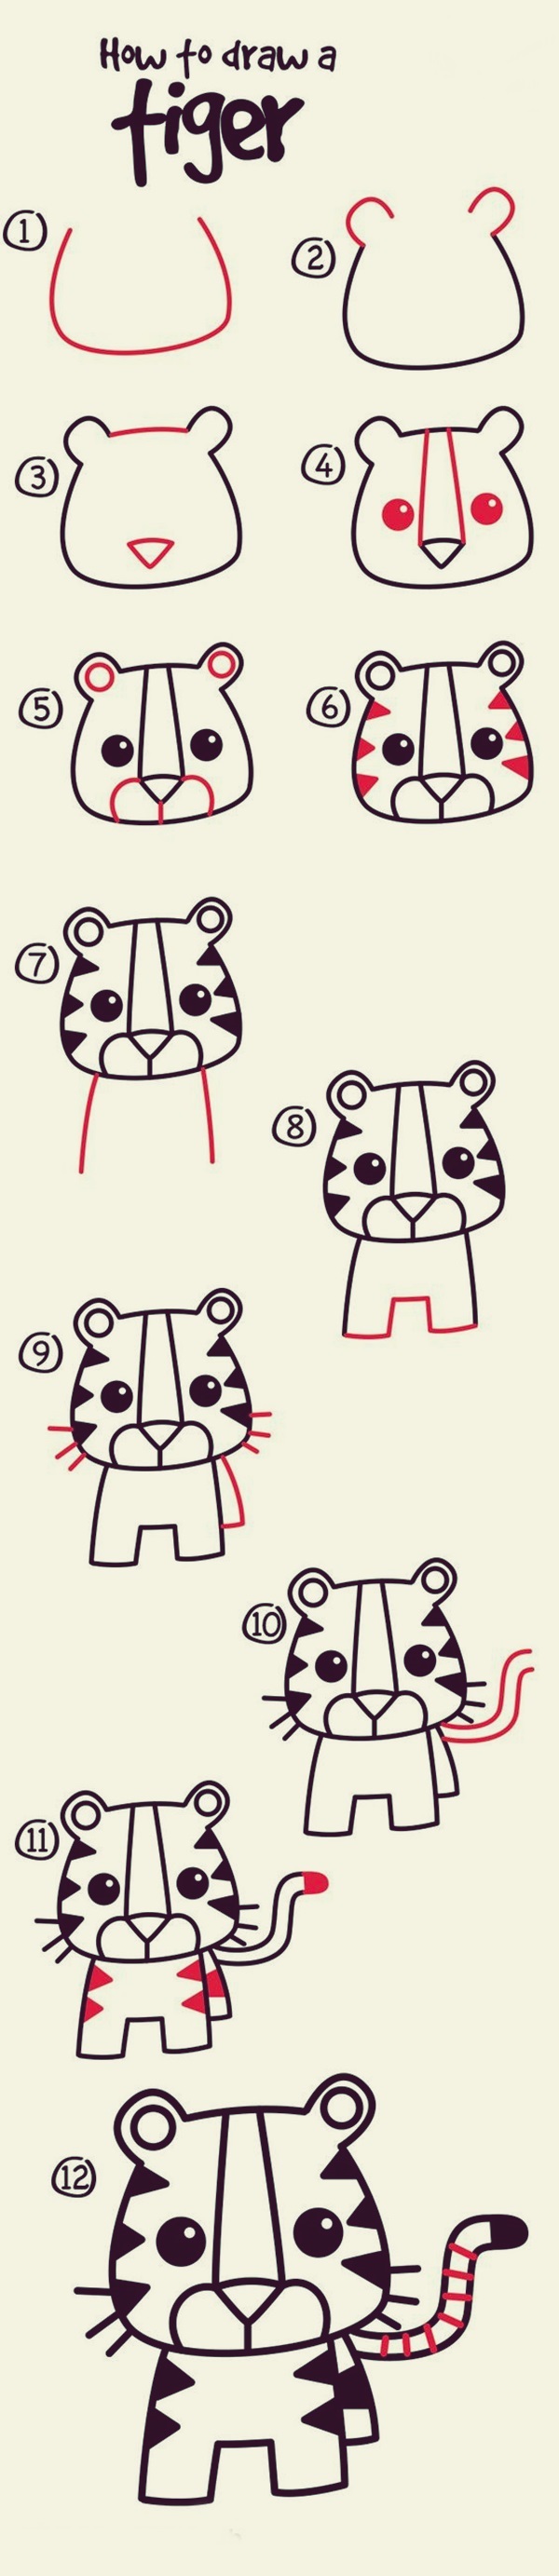 How to draw Cute Animals (1)